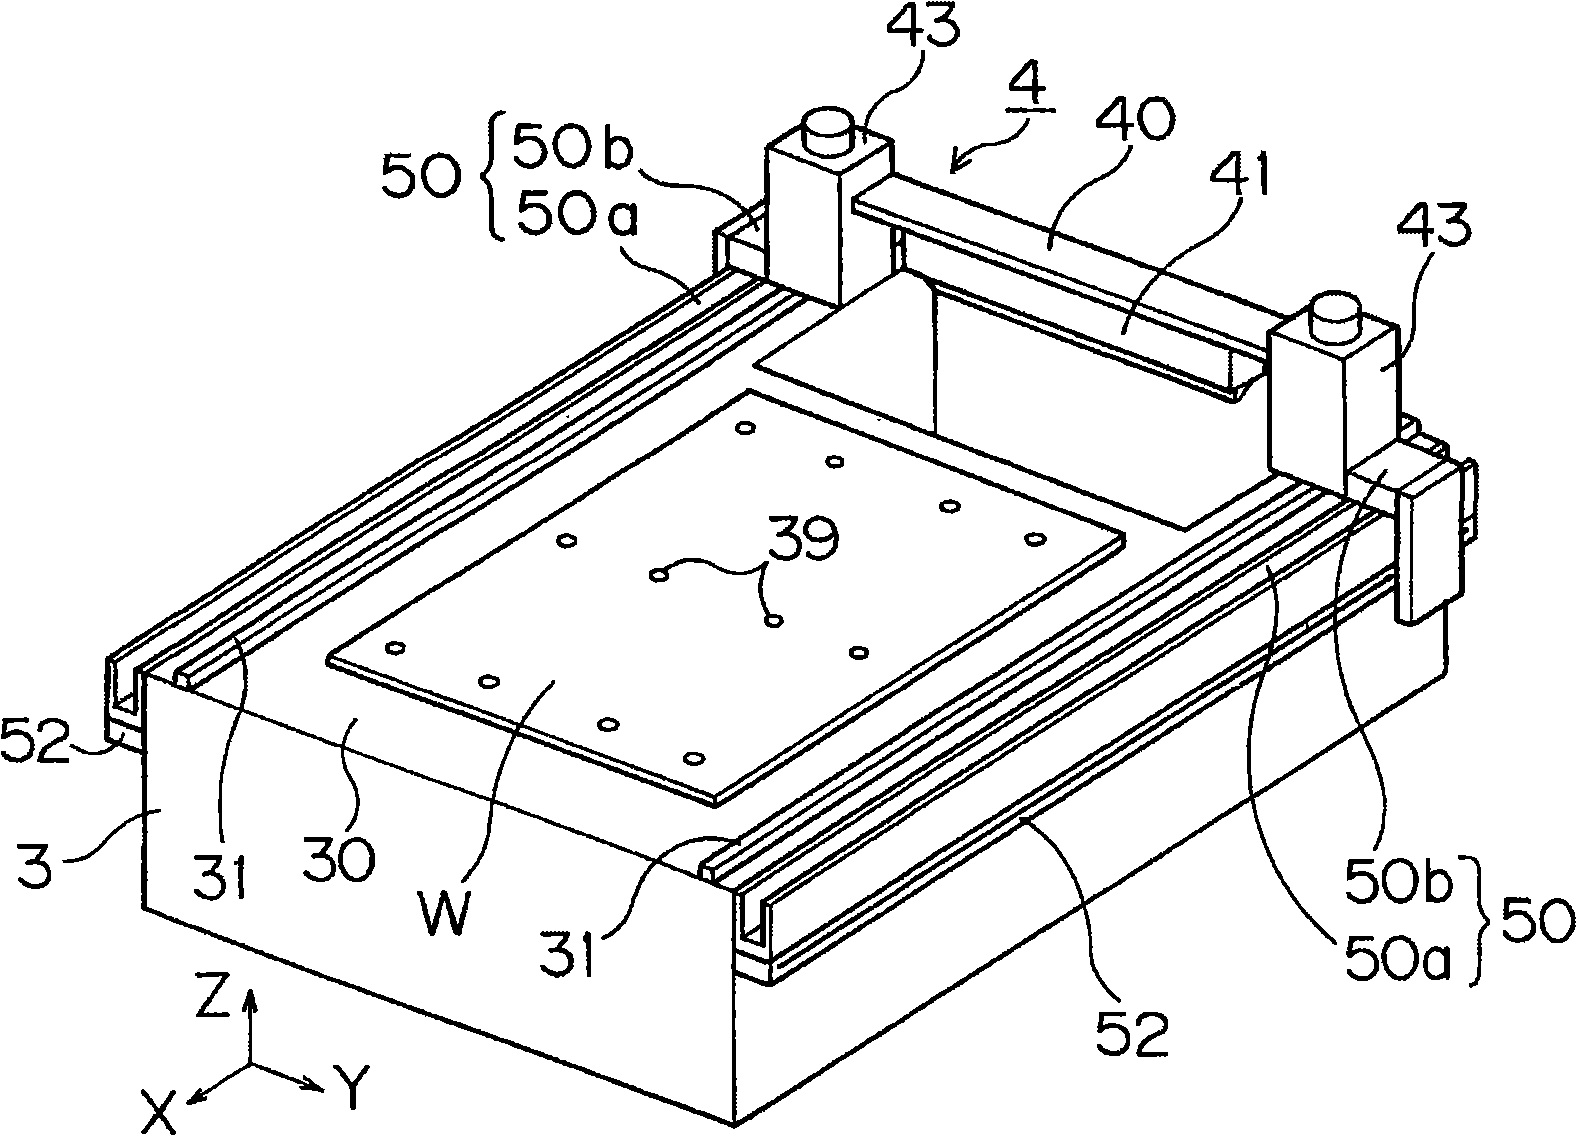 Nozzle cleaning apparatus